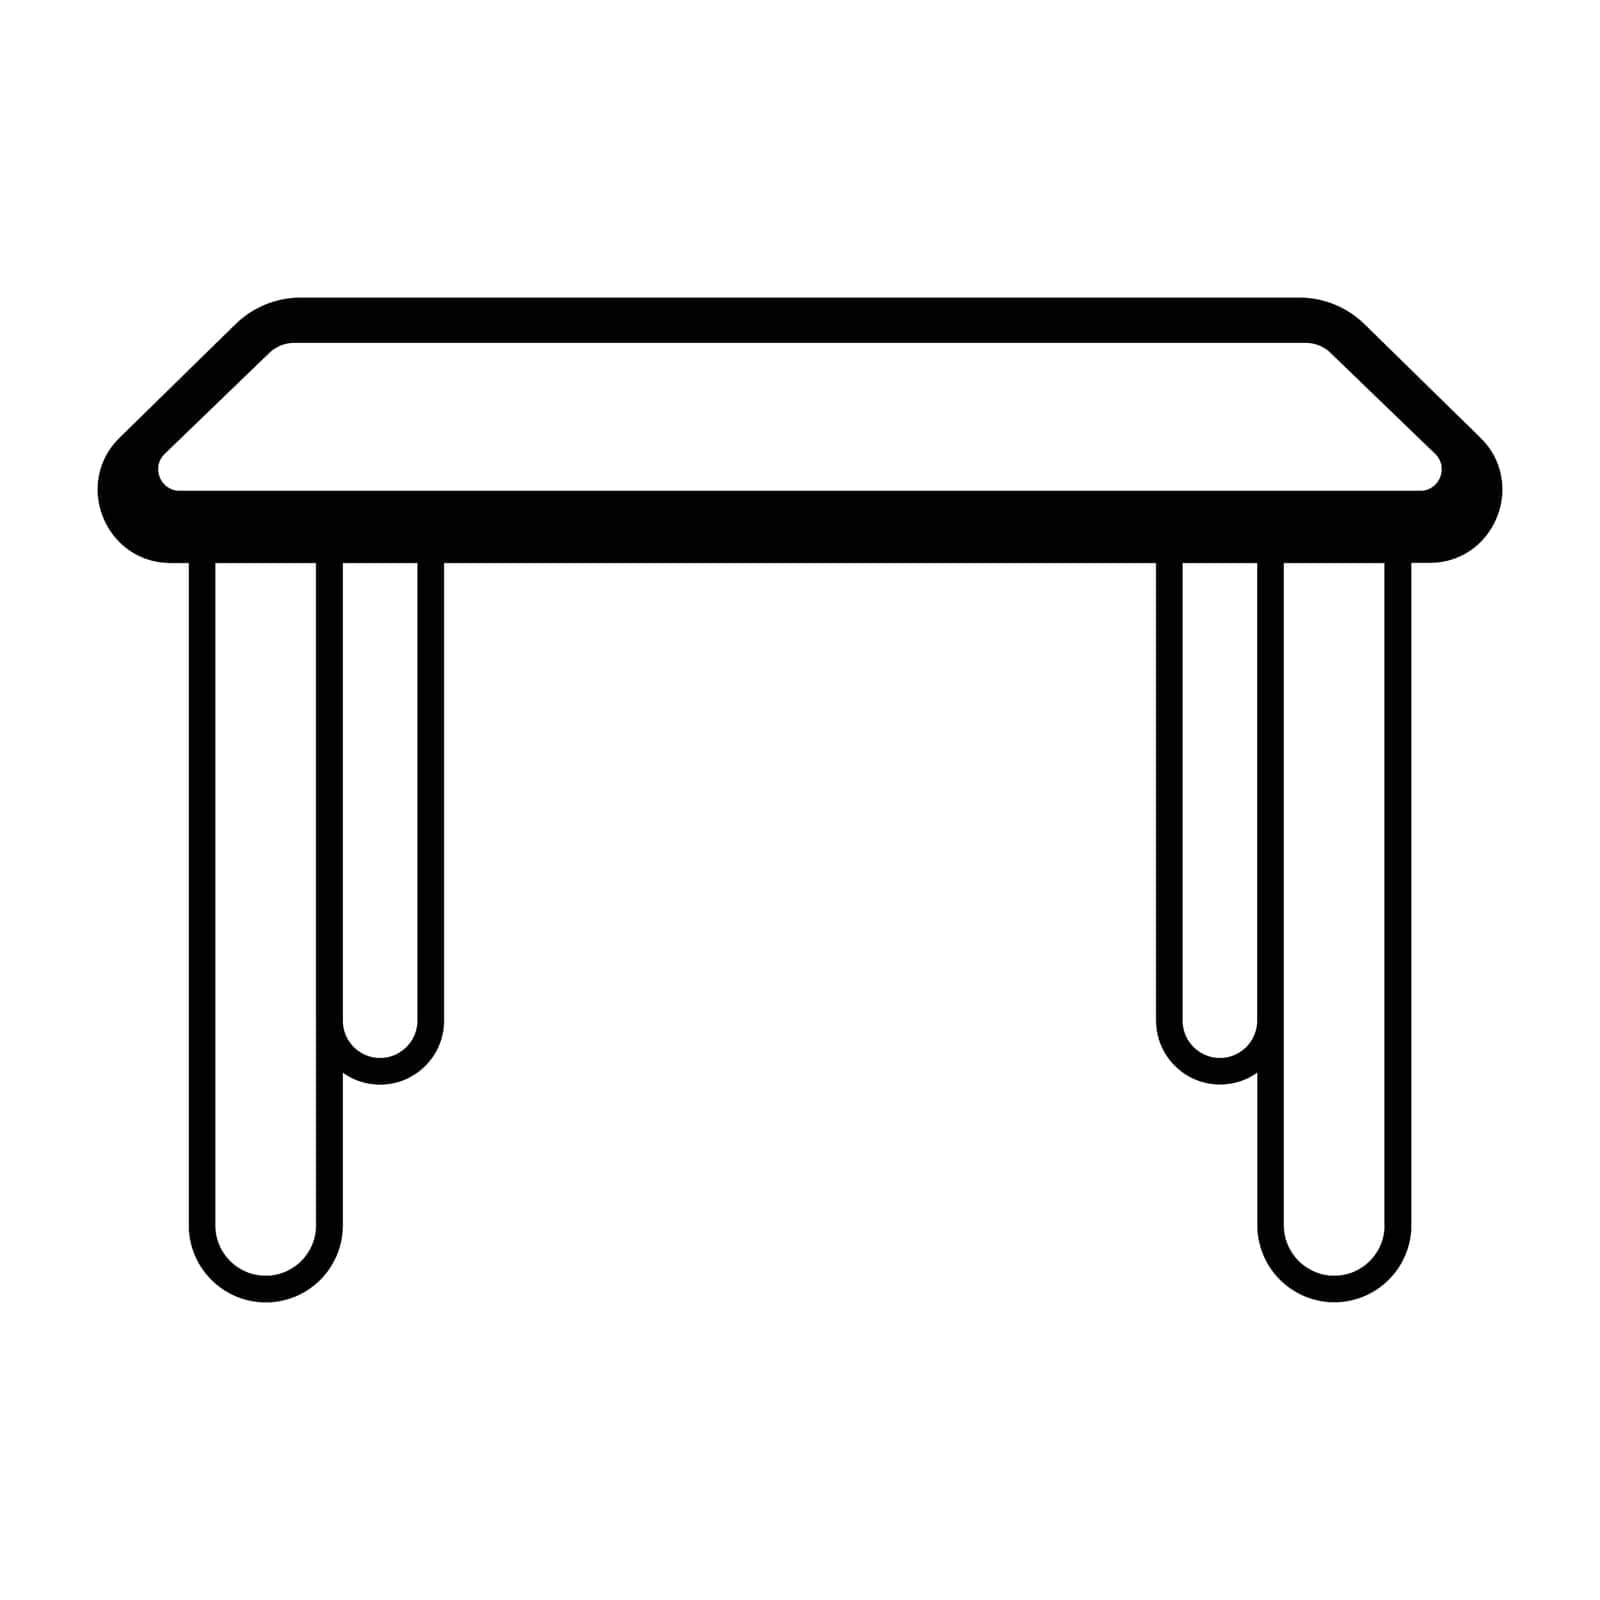 black vector table icon on white background by AdamLapunik